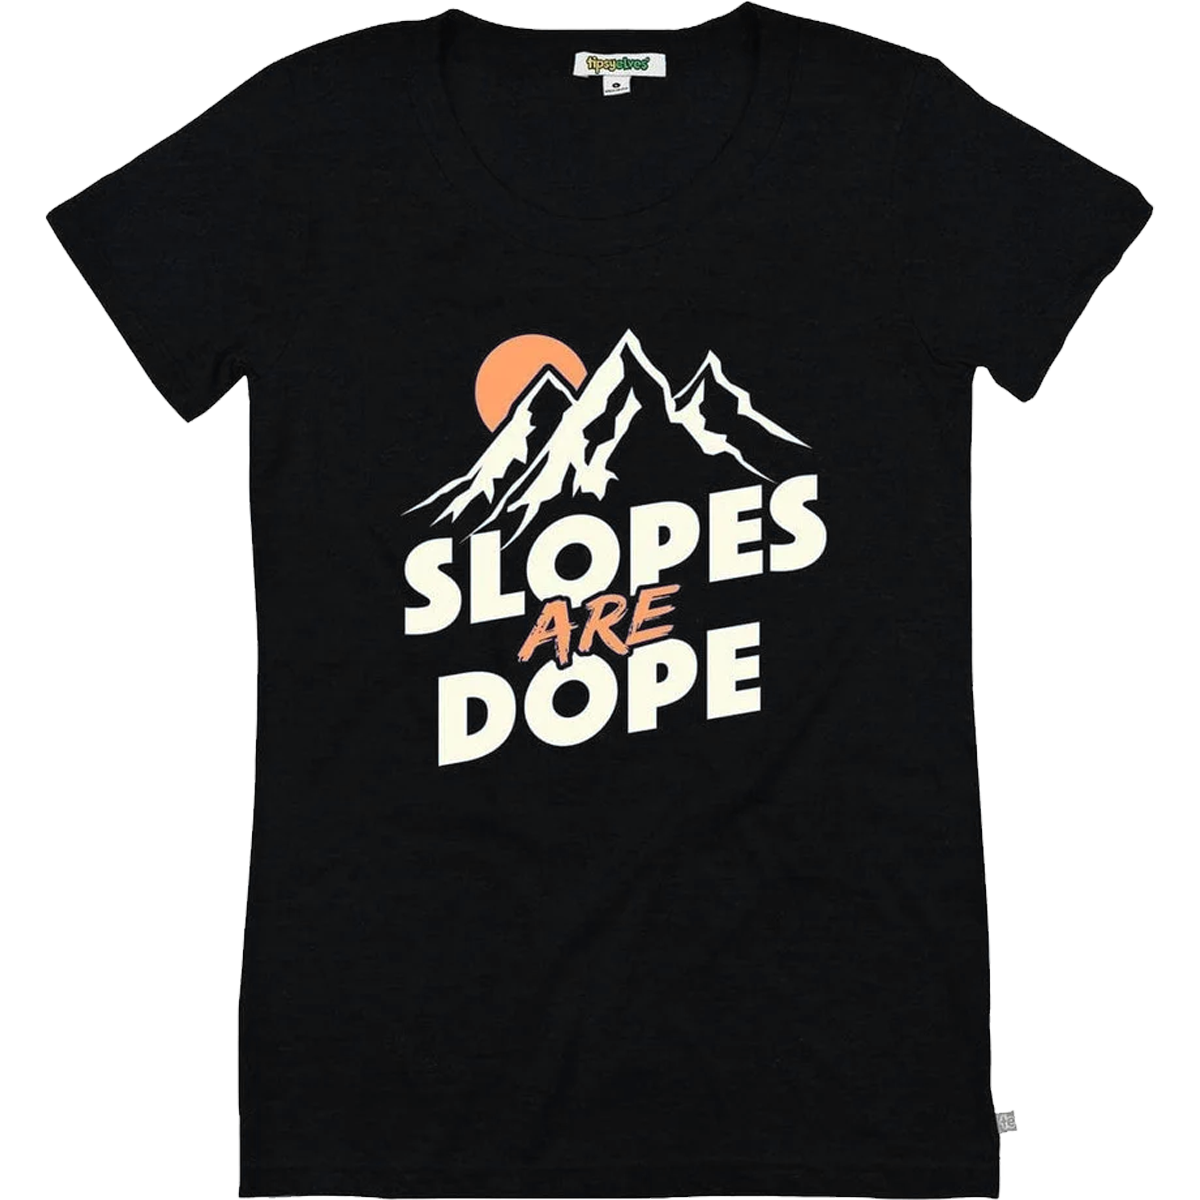 Women's Slopes Are Dope Tee alternate view